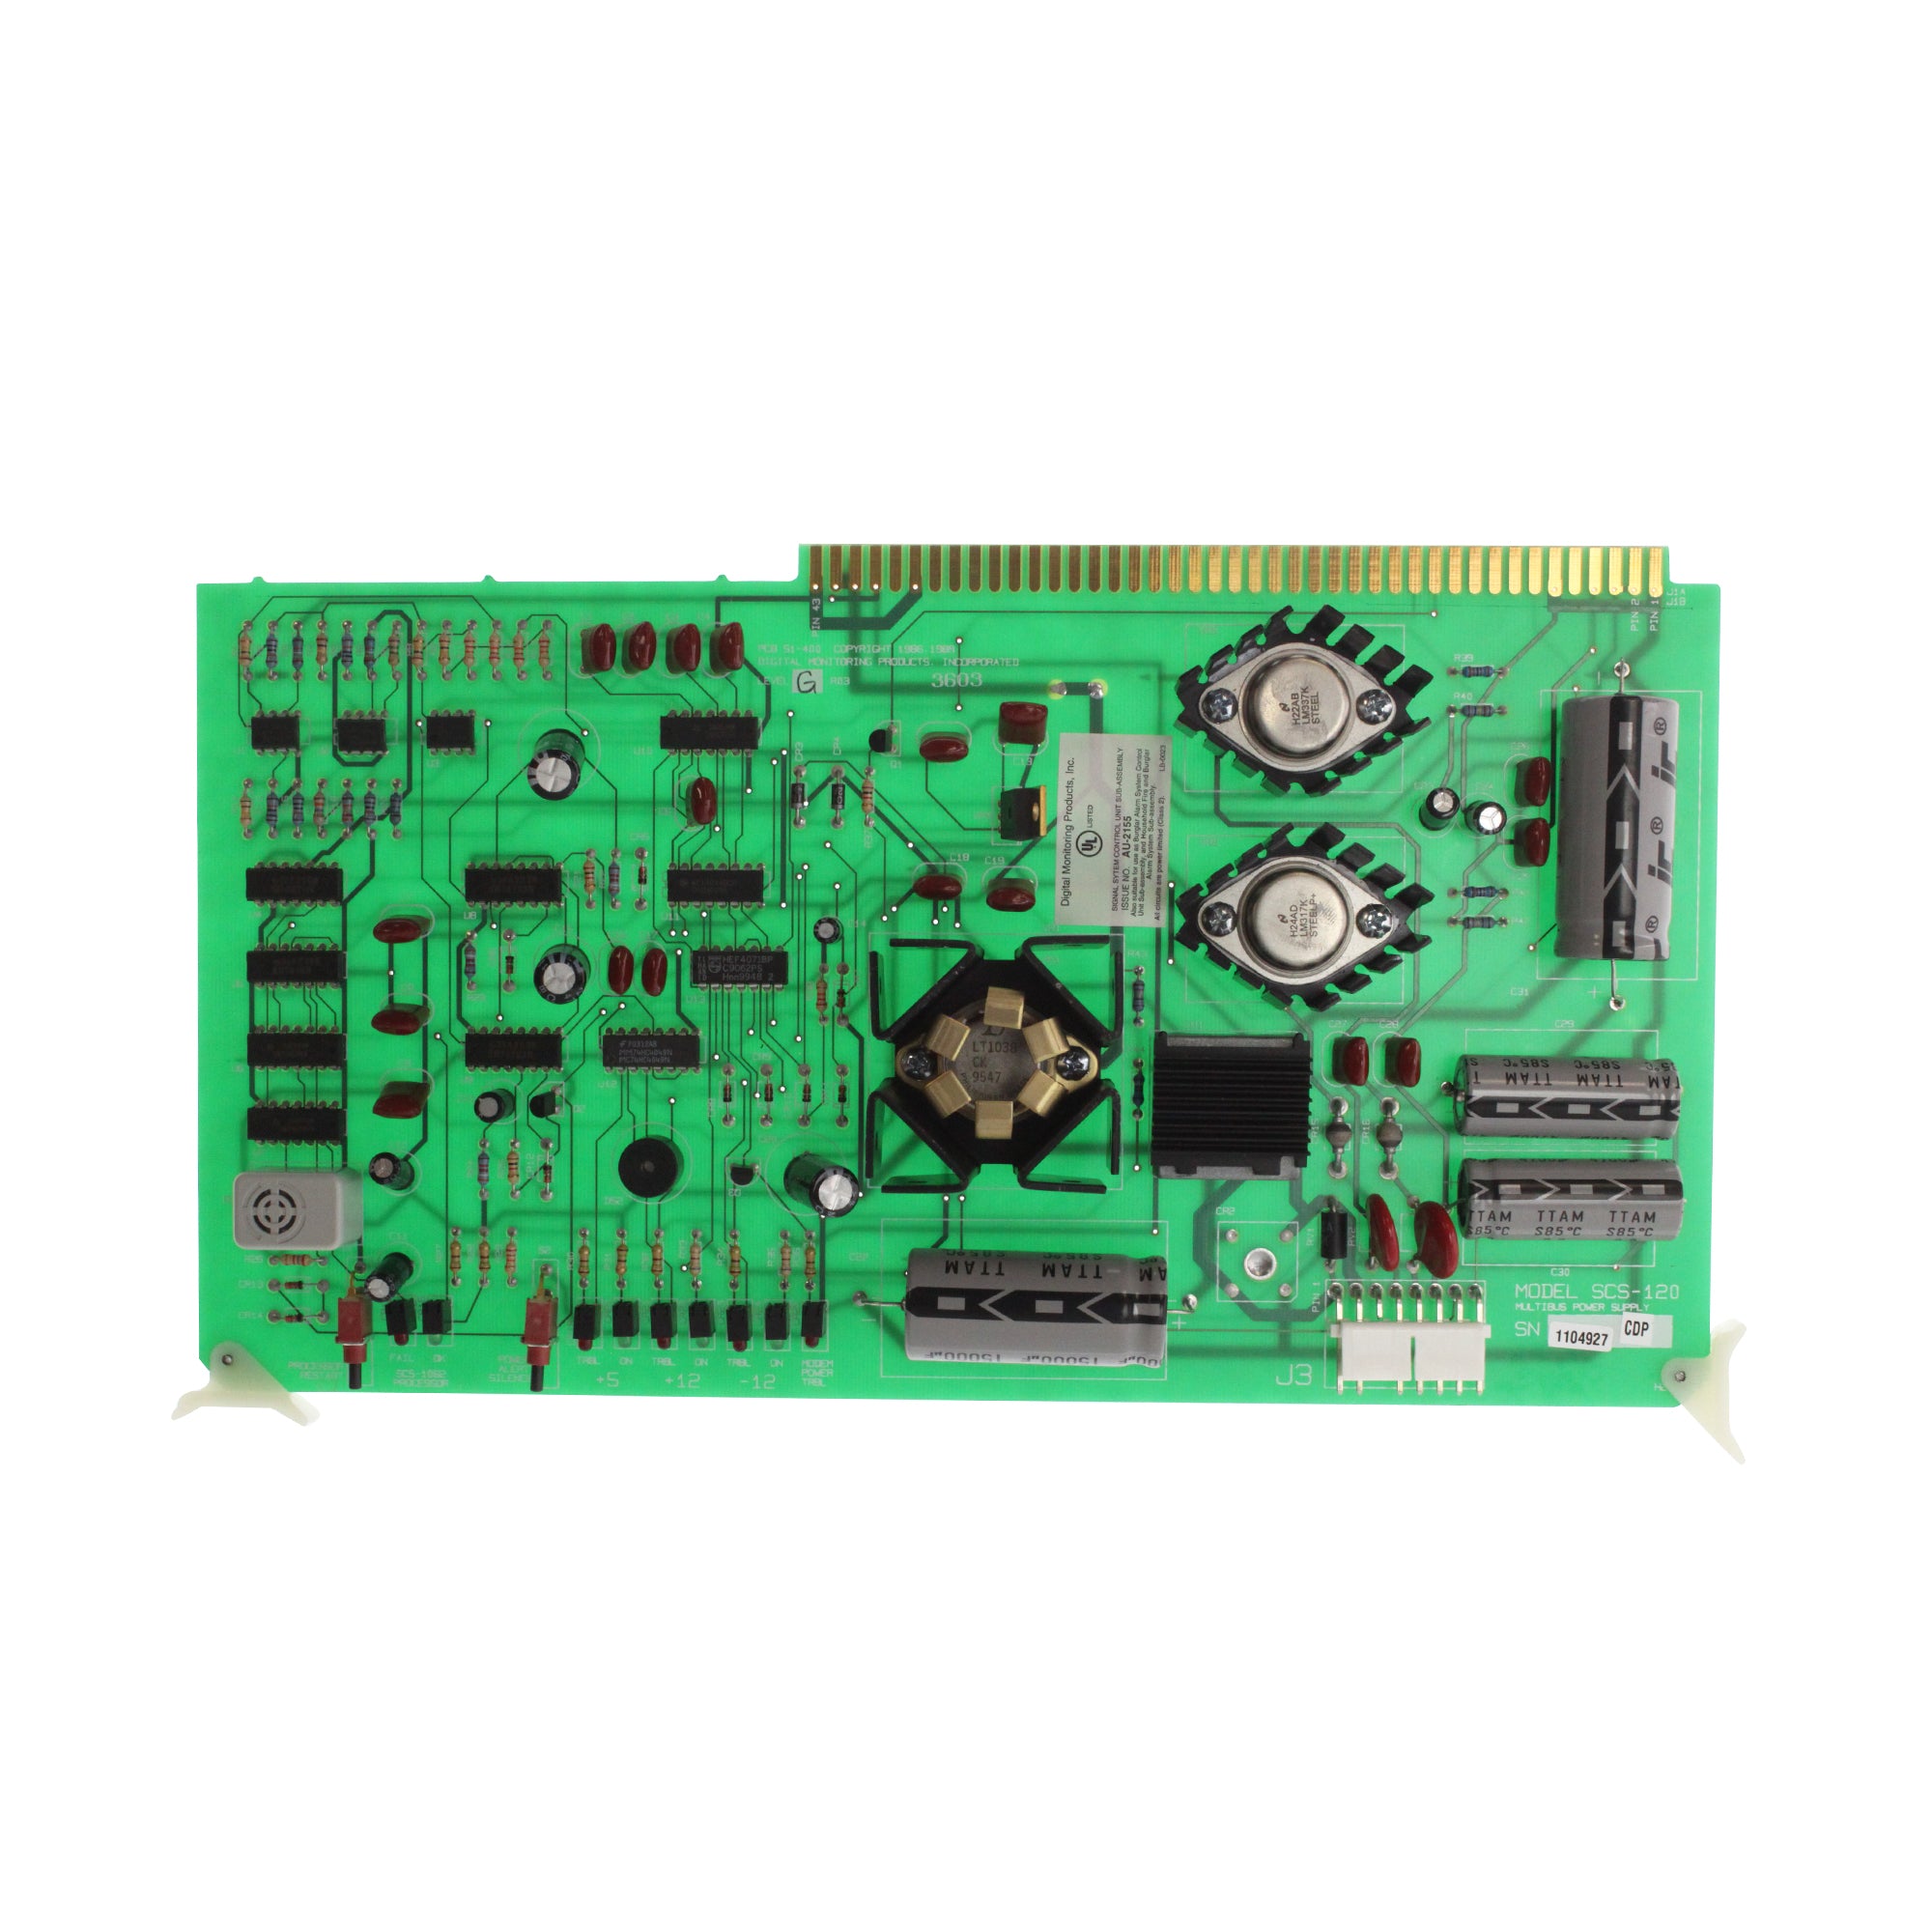 Digital Monitoring Products, DIGITAL MONITORING PRODUCTS SCS-120 MULTIBUS POWER SUPPLY CARD FOR THE SCS-1062